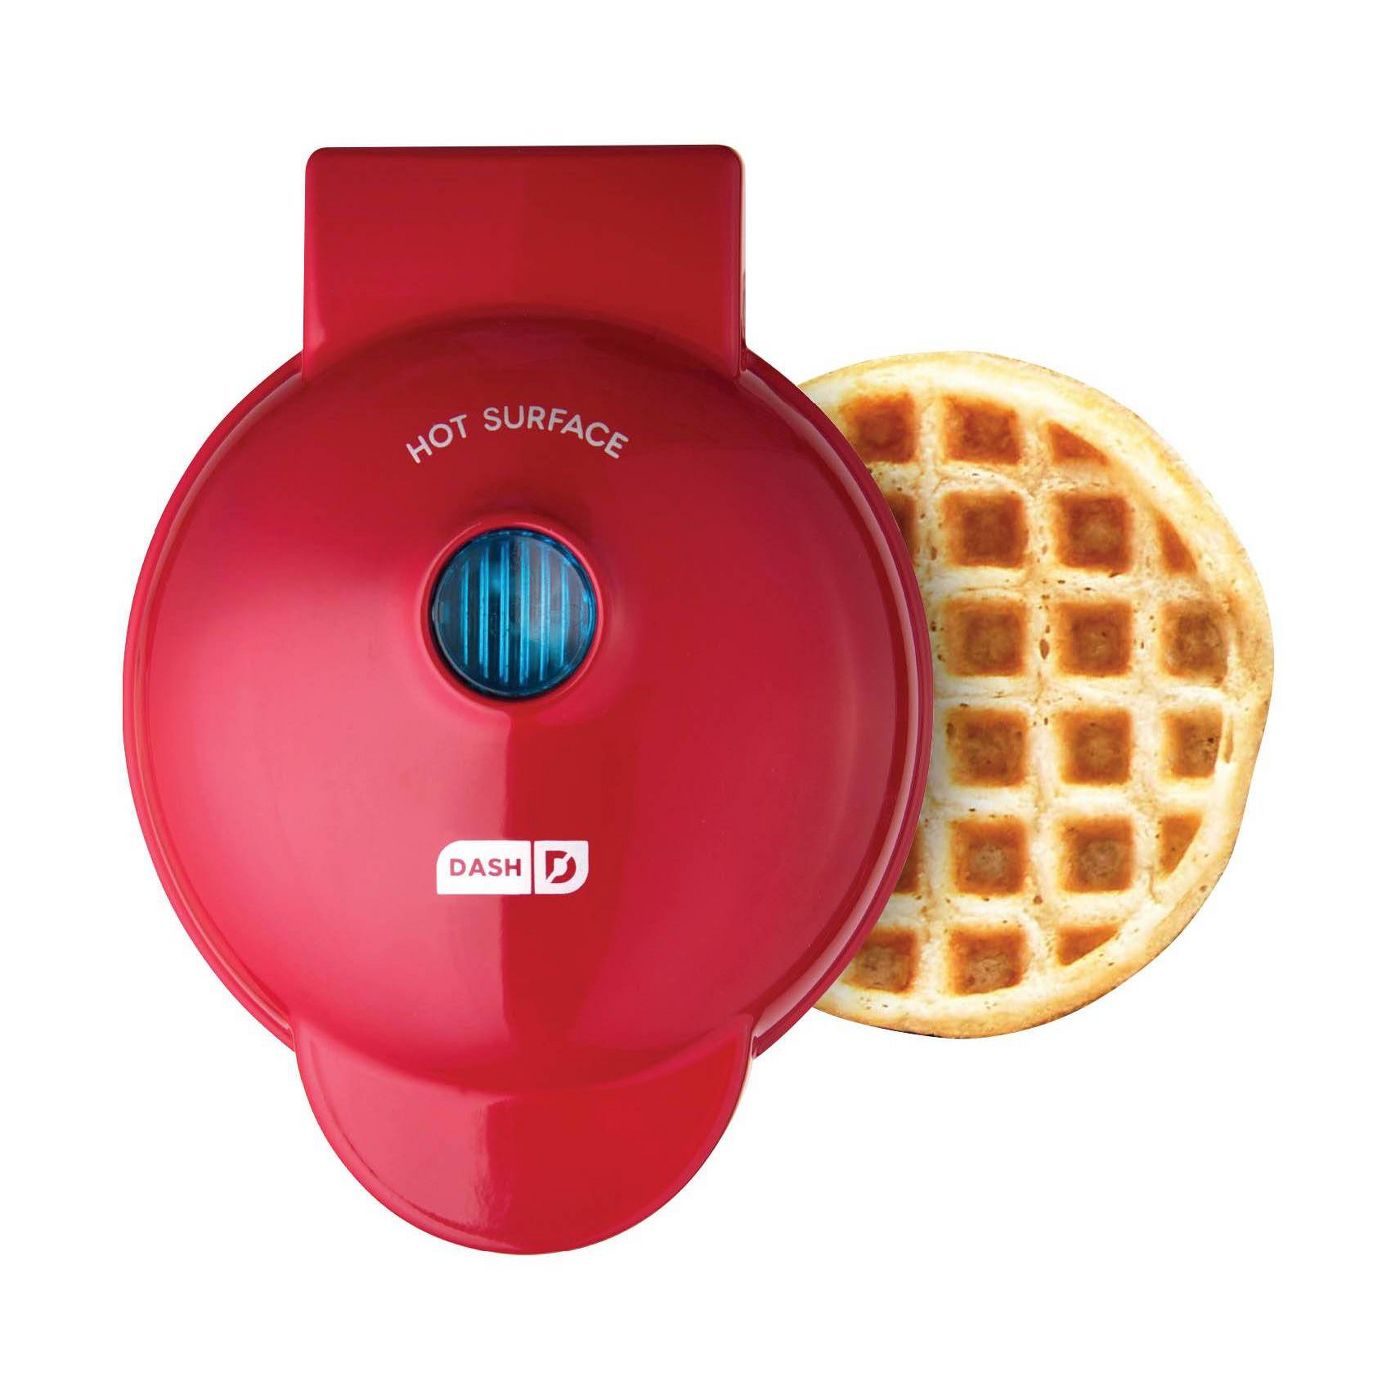 50+ cool gifts under $15 for men and women: Dash mini waffle maker or mini griddle